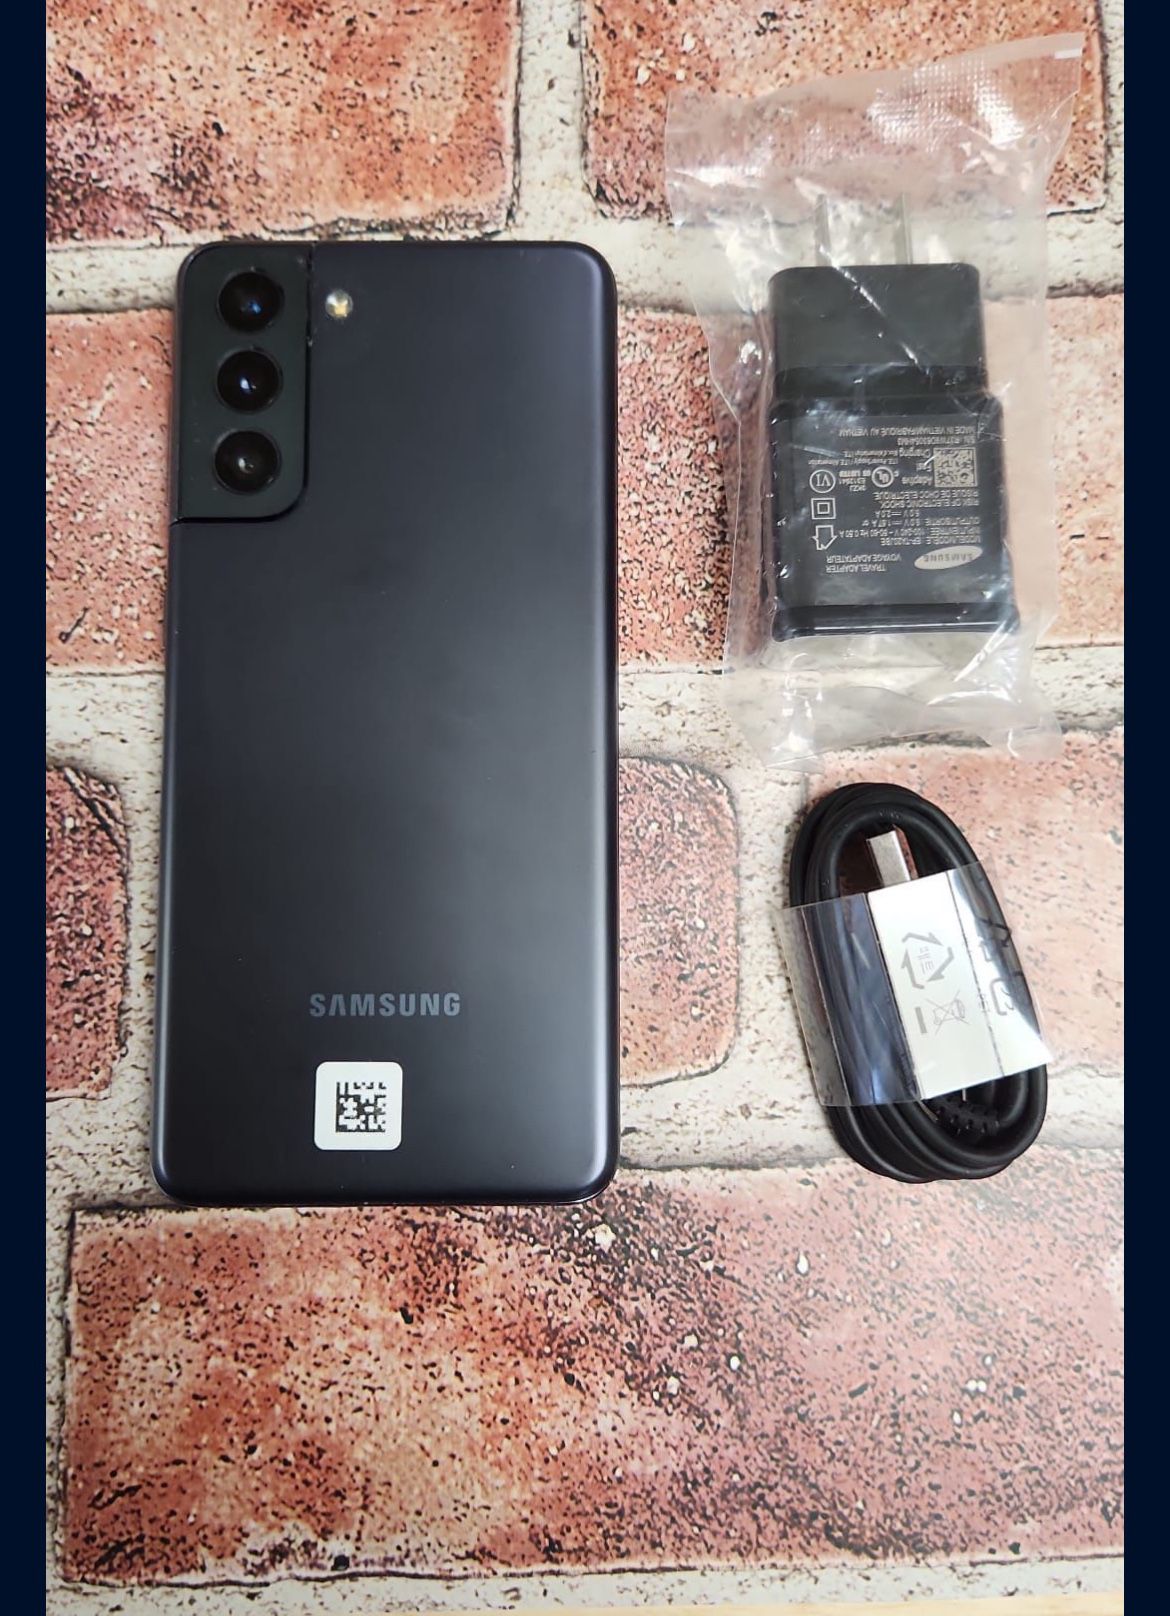 Samsung Galaxy s21  UNLOCKED   Free new charger included   Great condition , phone clean and reseted, ready to use  • Unlocked,T-Mobile, ATT, Cricket,